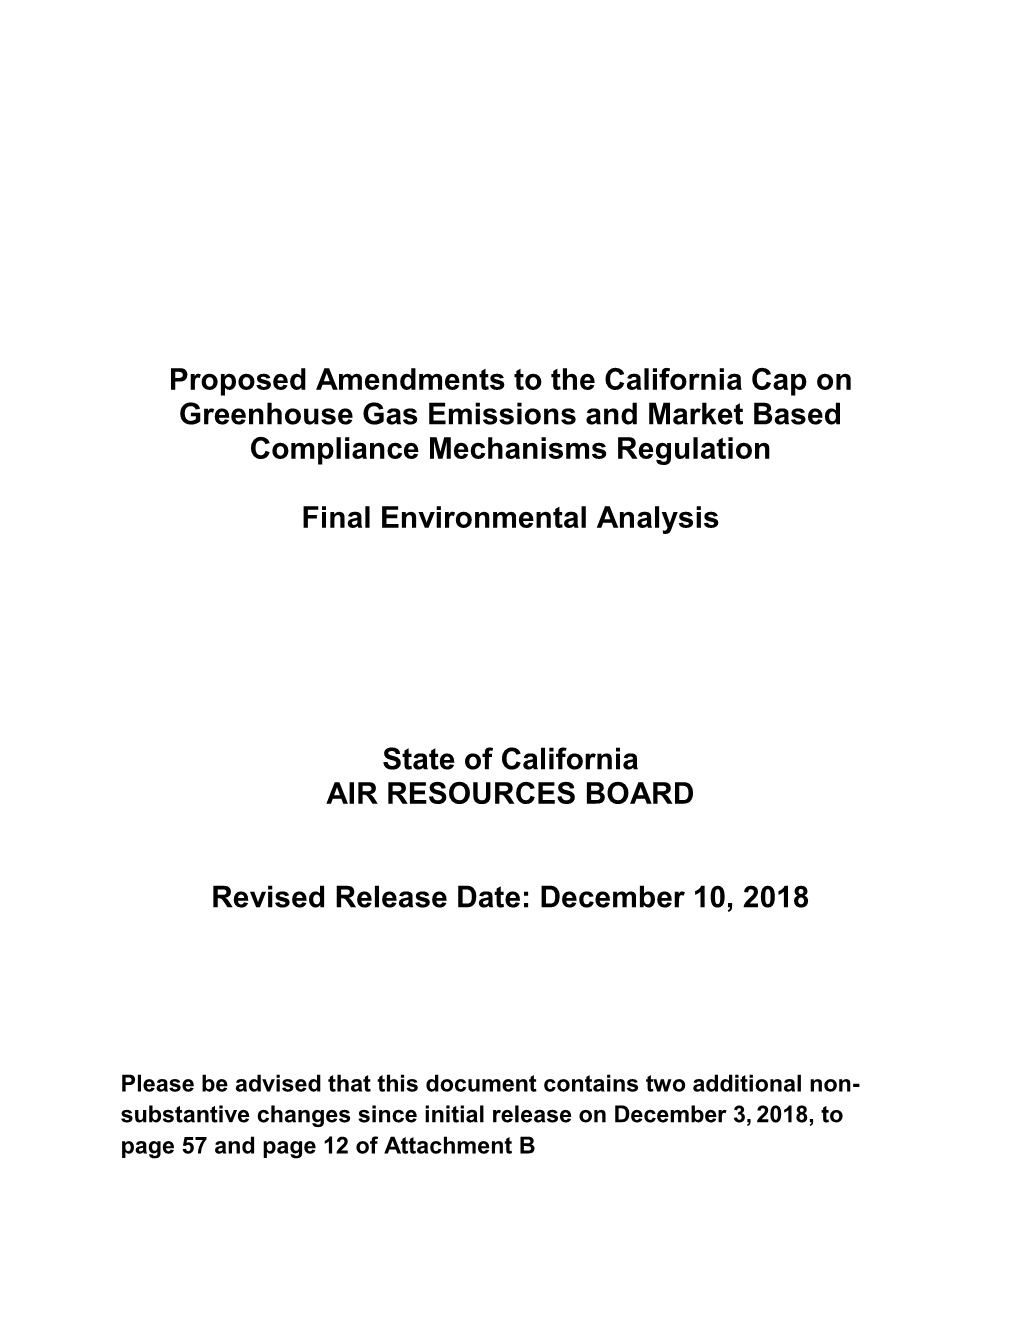 Proposed Amendments to the California Cap on Greenhouse Gas Emissions and Market Based Compliance Mechanisms Regulation